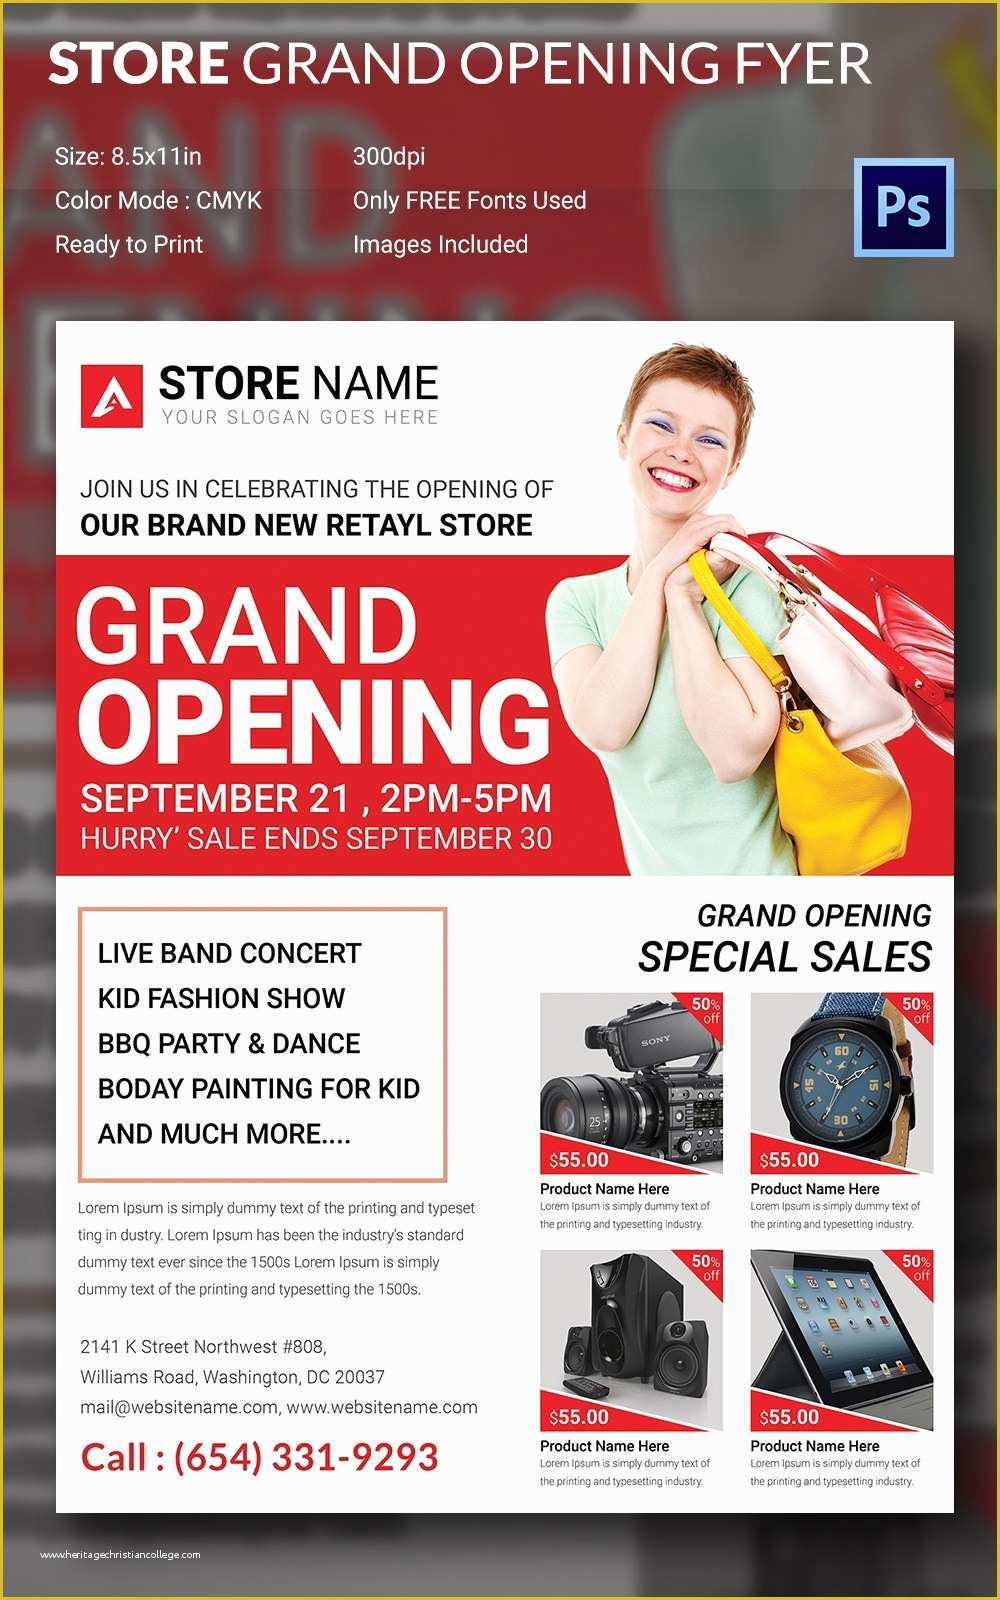 Grand Opening Flyer Template Free Of Grand Opening Flyer Template 34 Free Psd Ai Vector